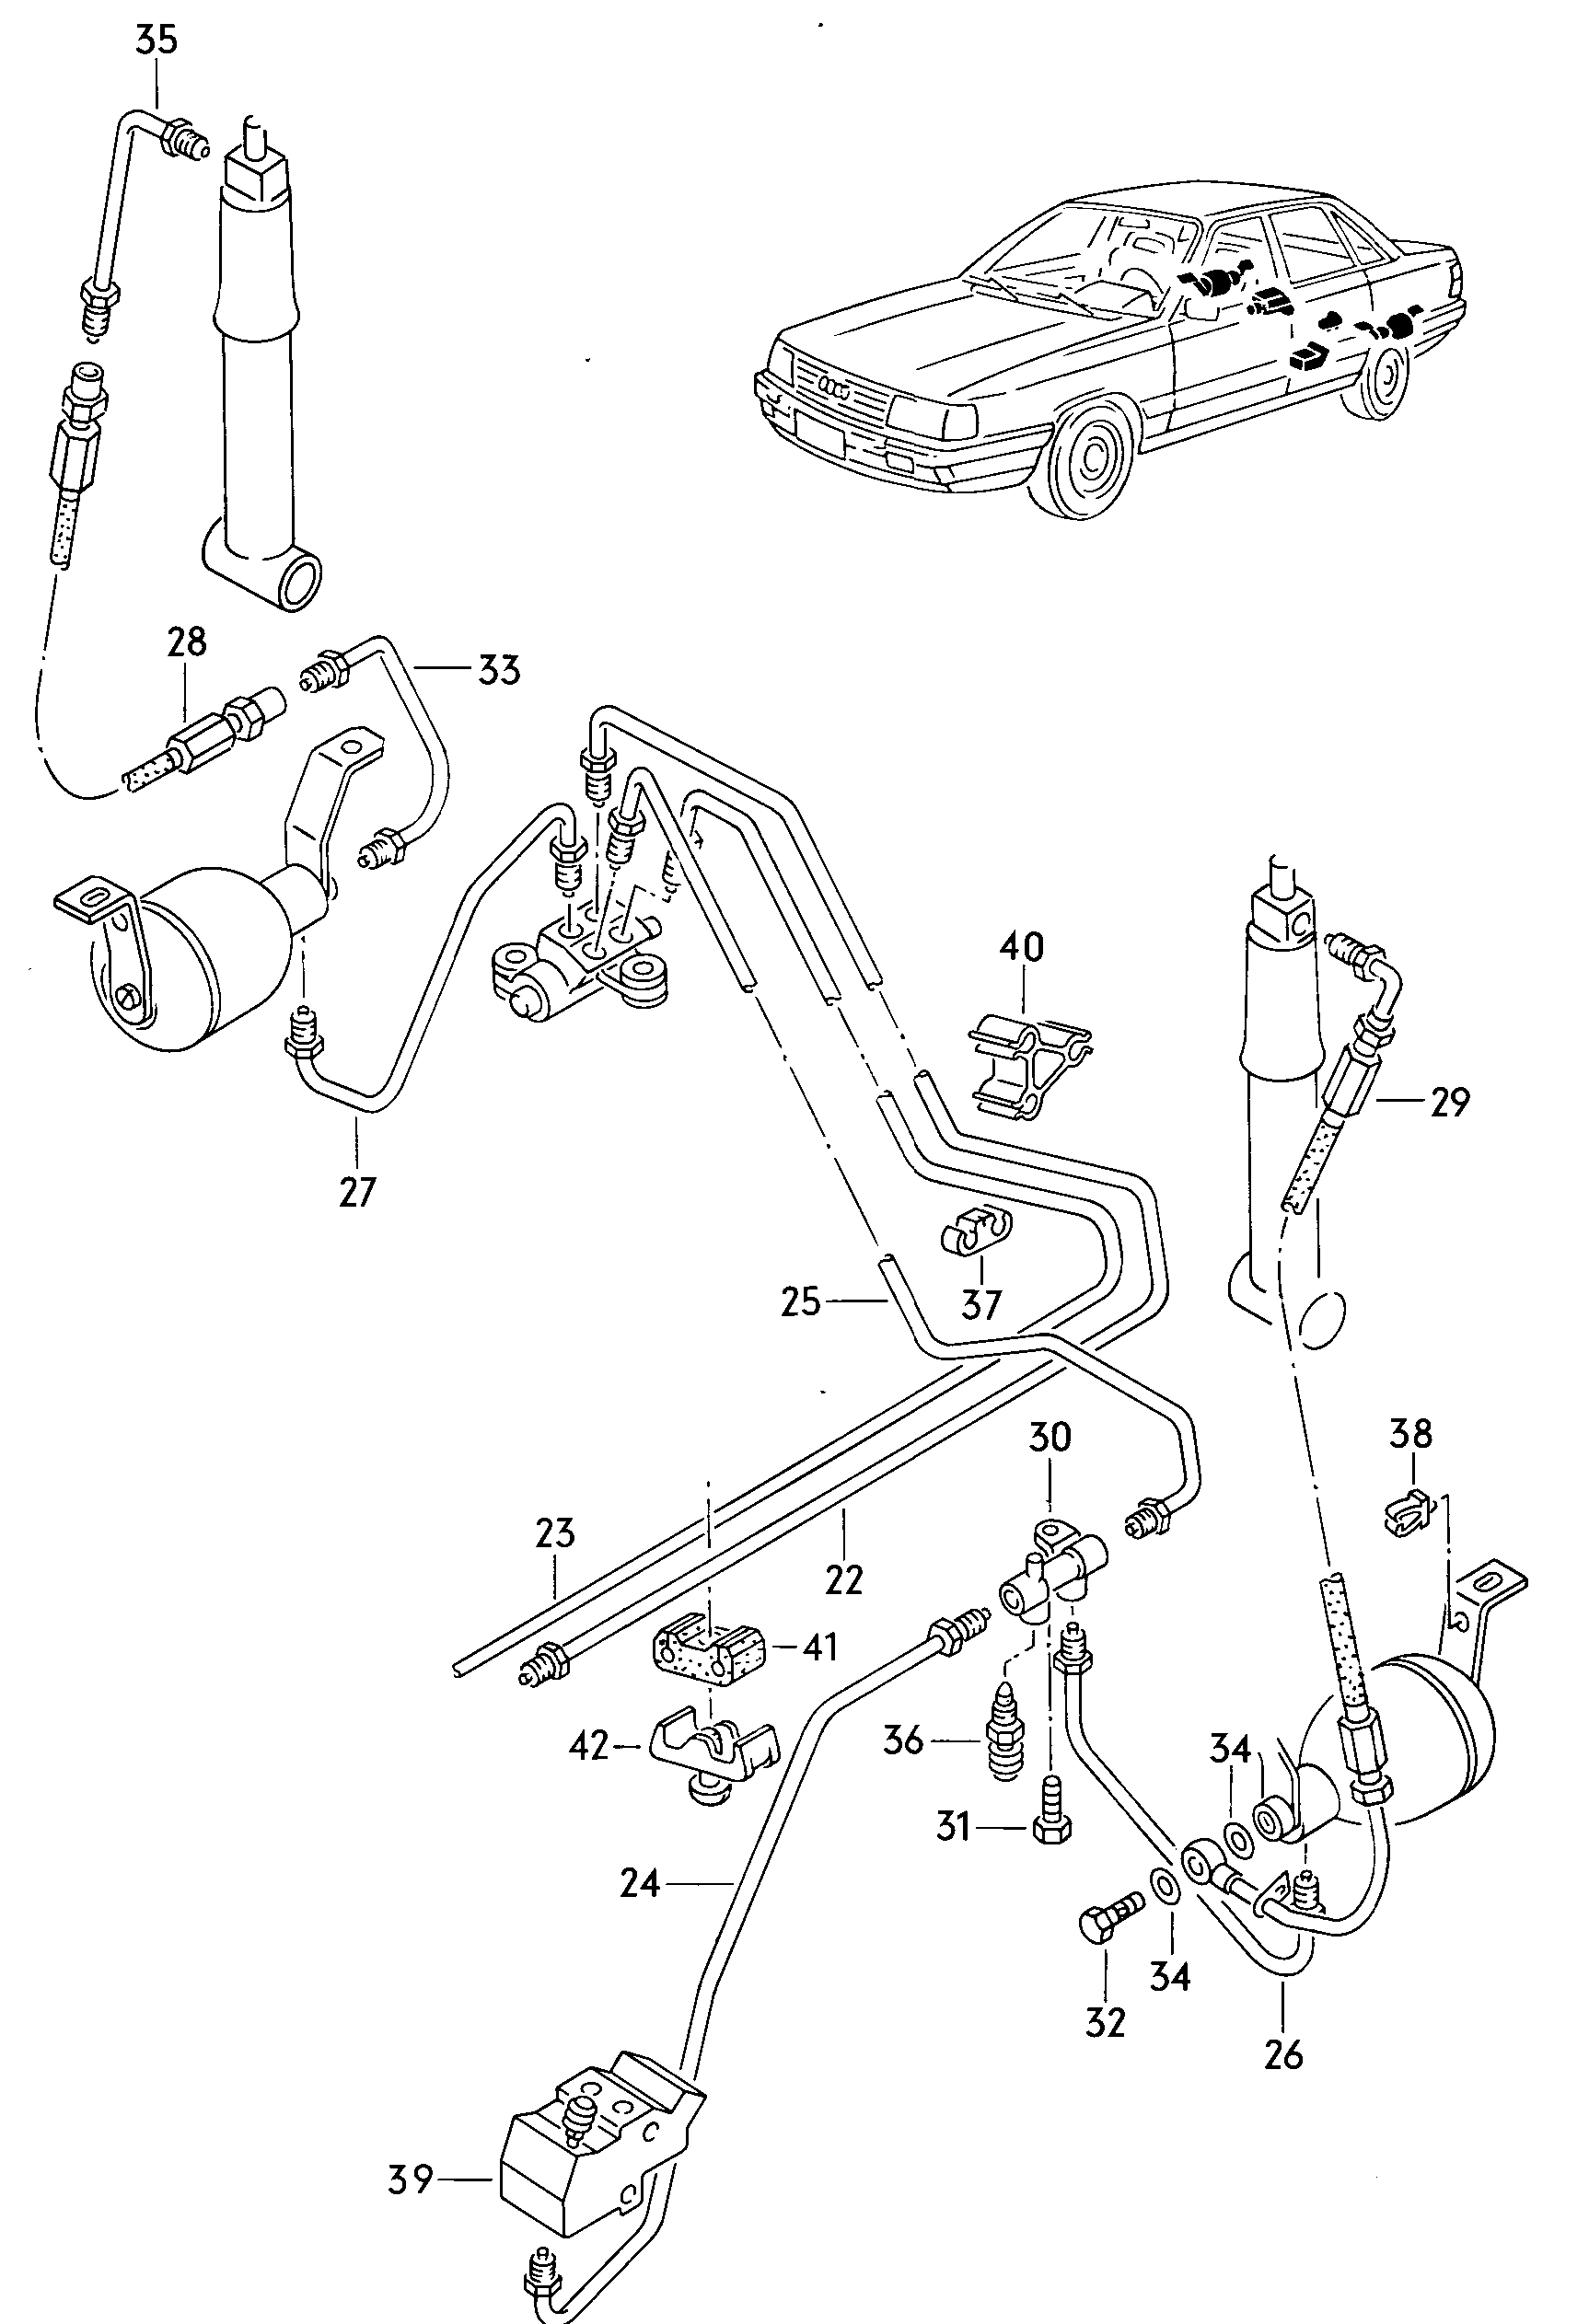 connecting parts for self-<br>levelling rear - Audi 100/Avant - a100